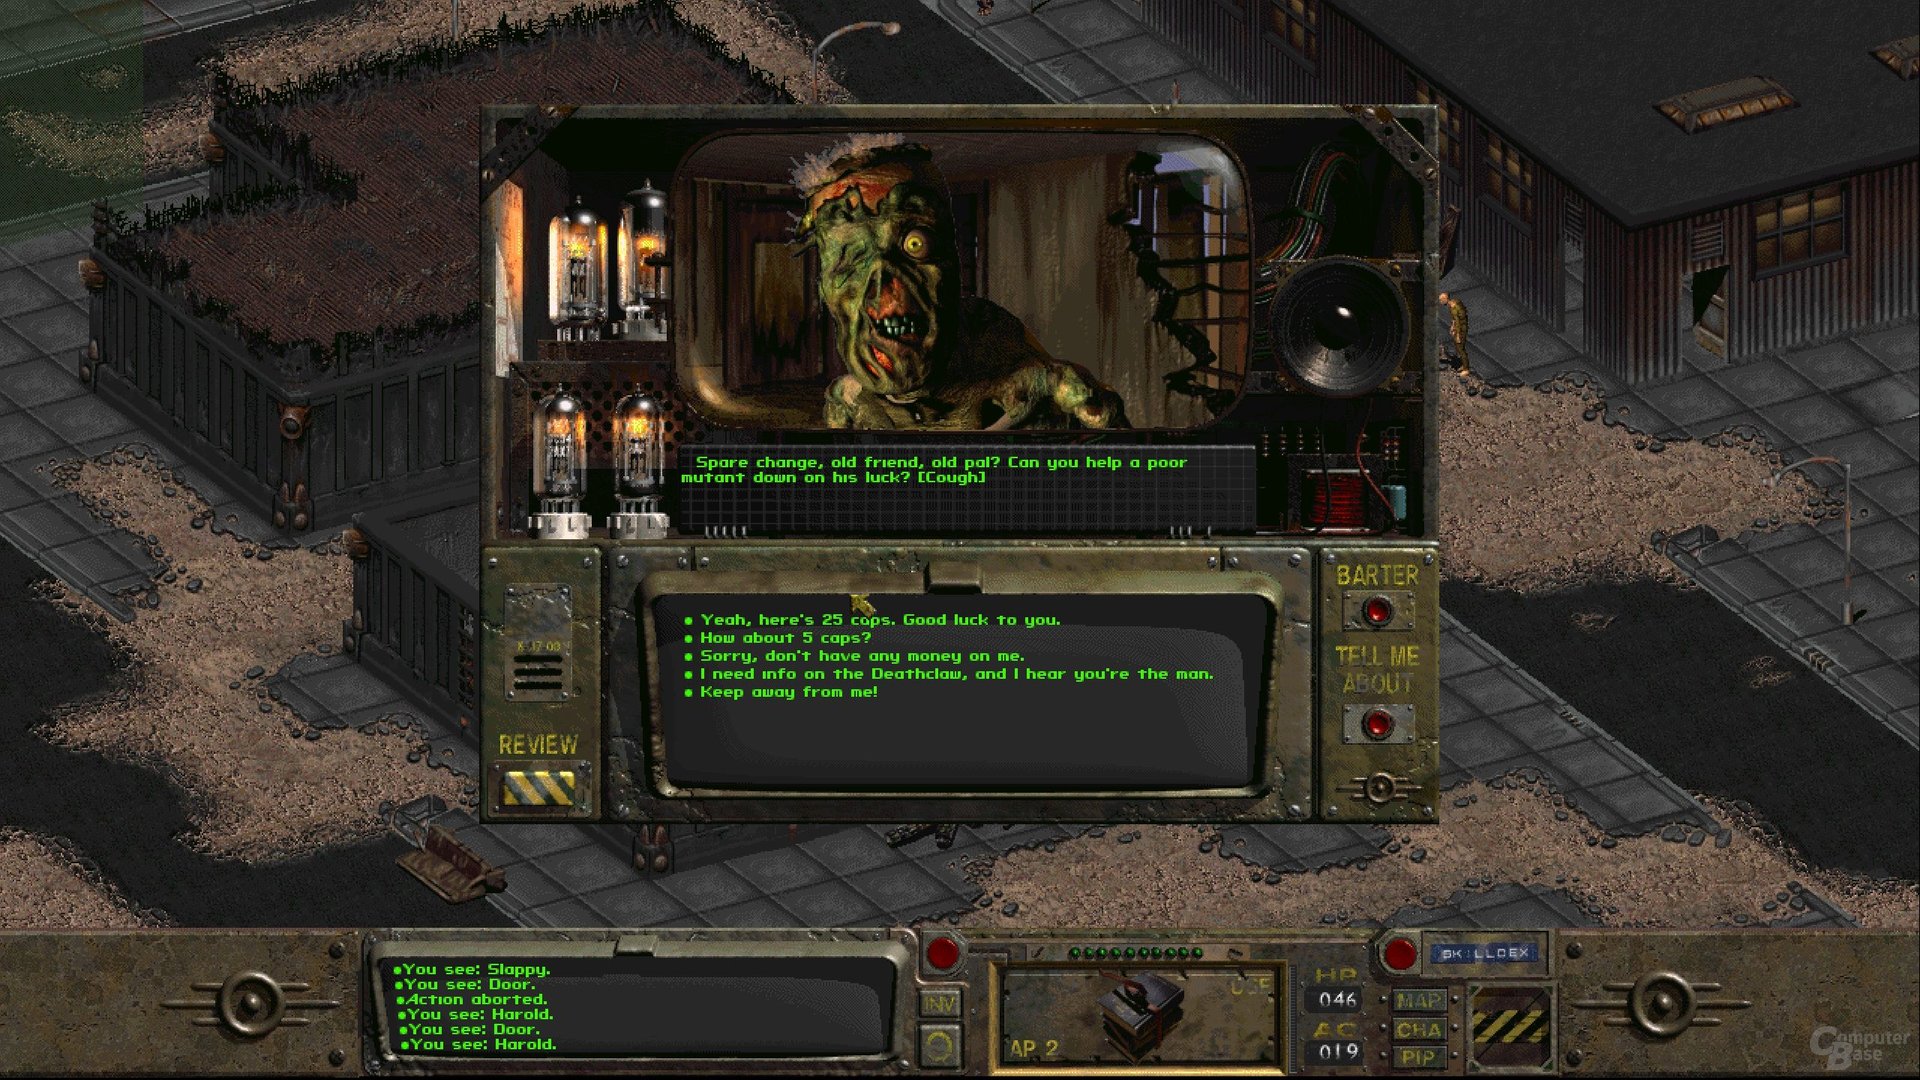 Fallout 1 играть. Игра Fallout 1. Фоллаут 2 a Post nuclear role playing. Fallout 1 2.